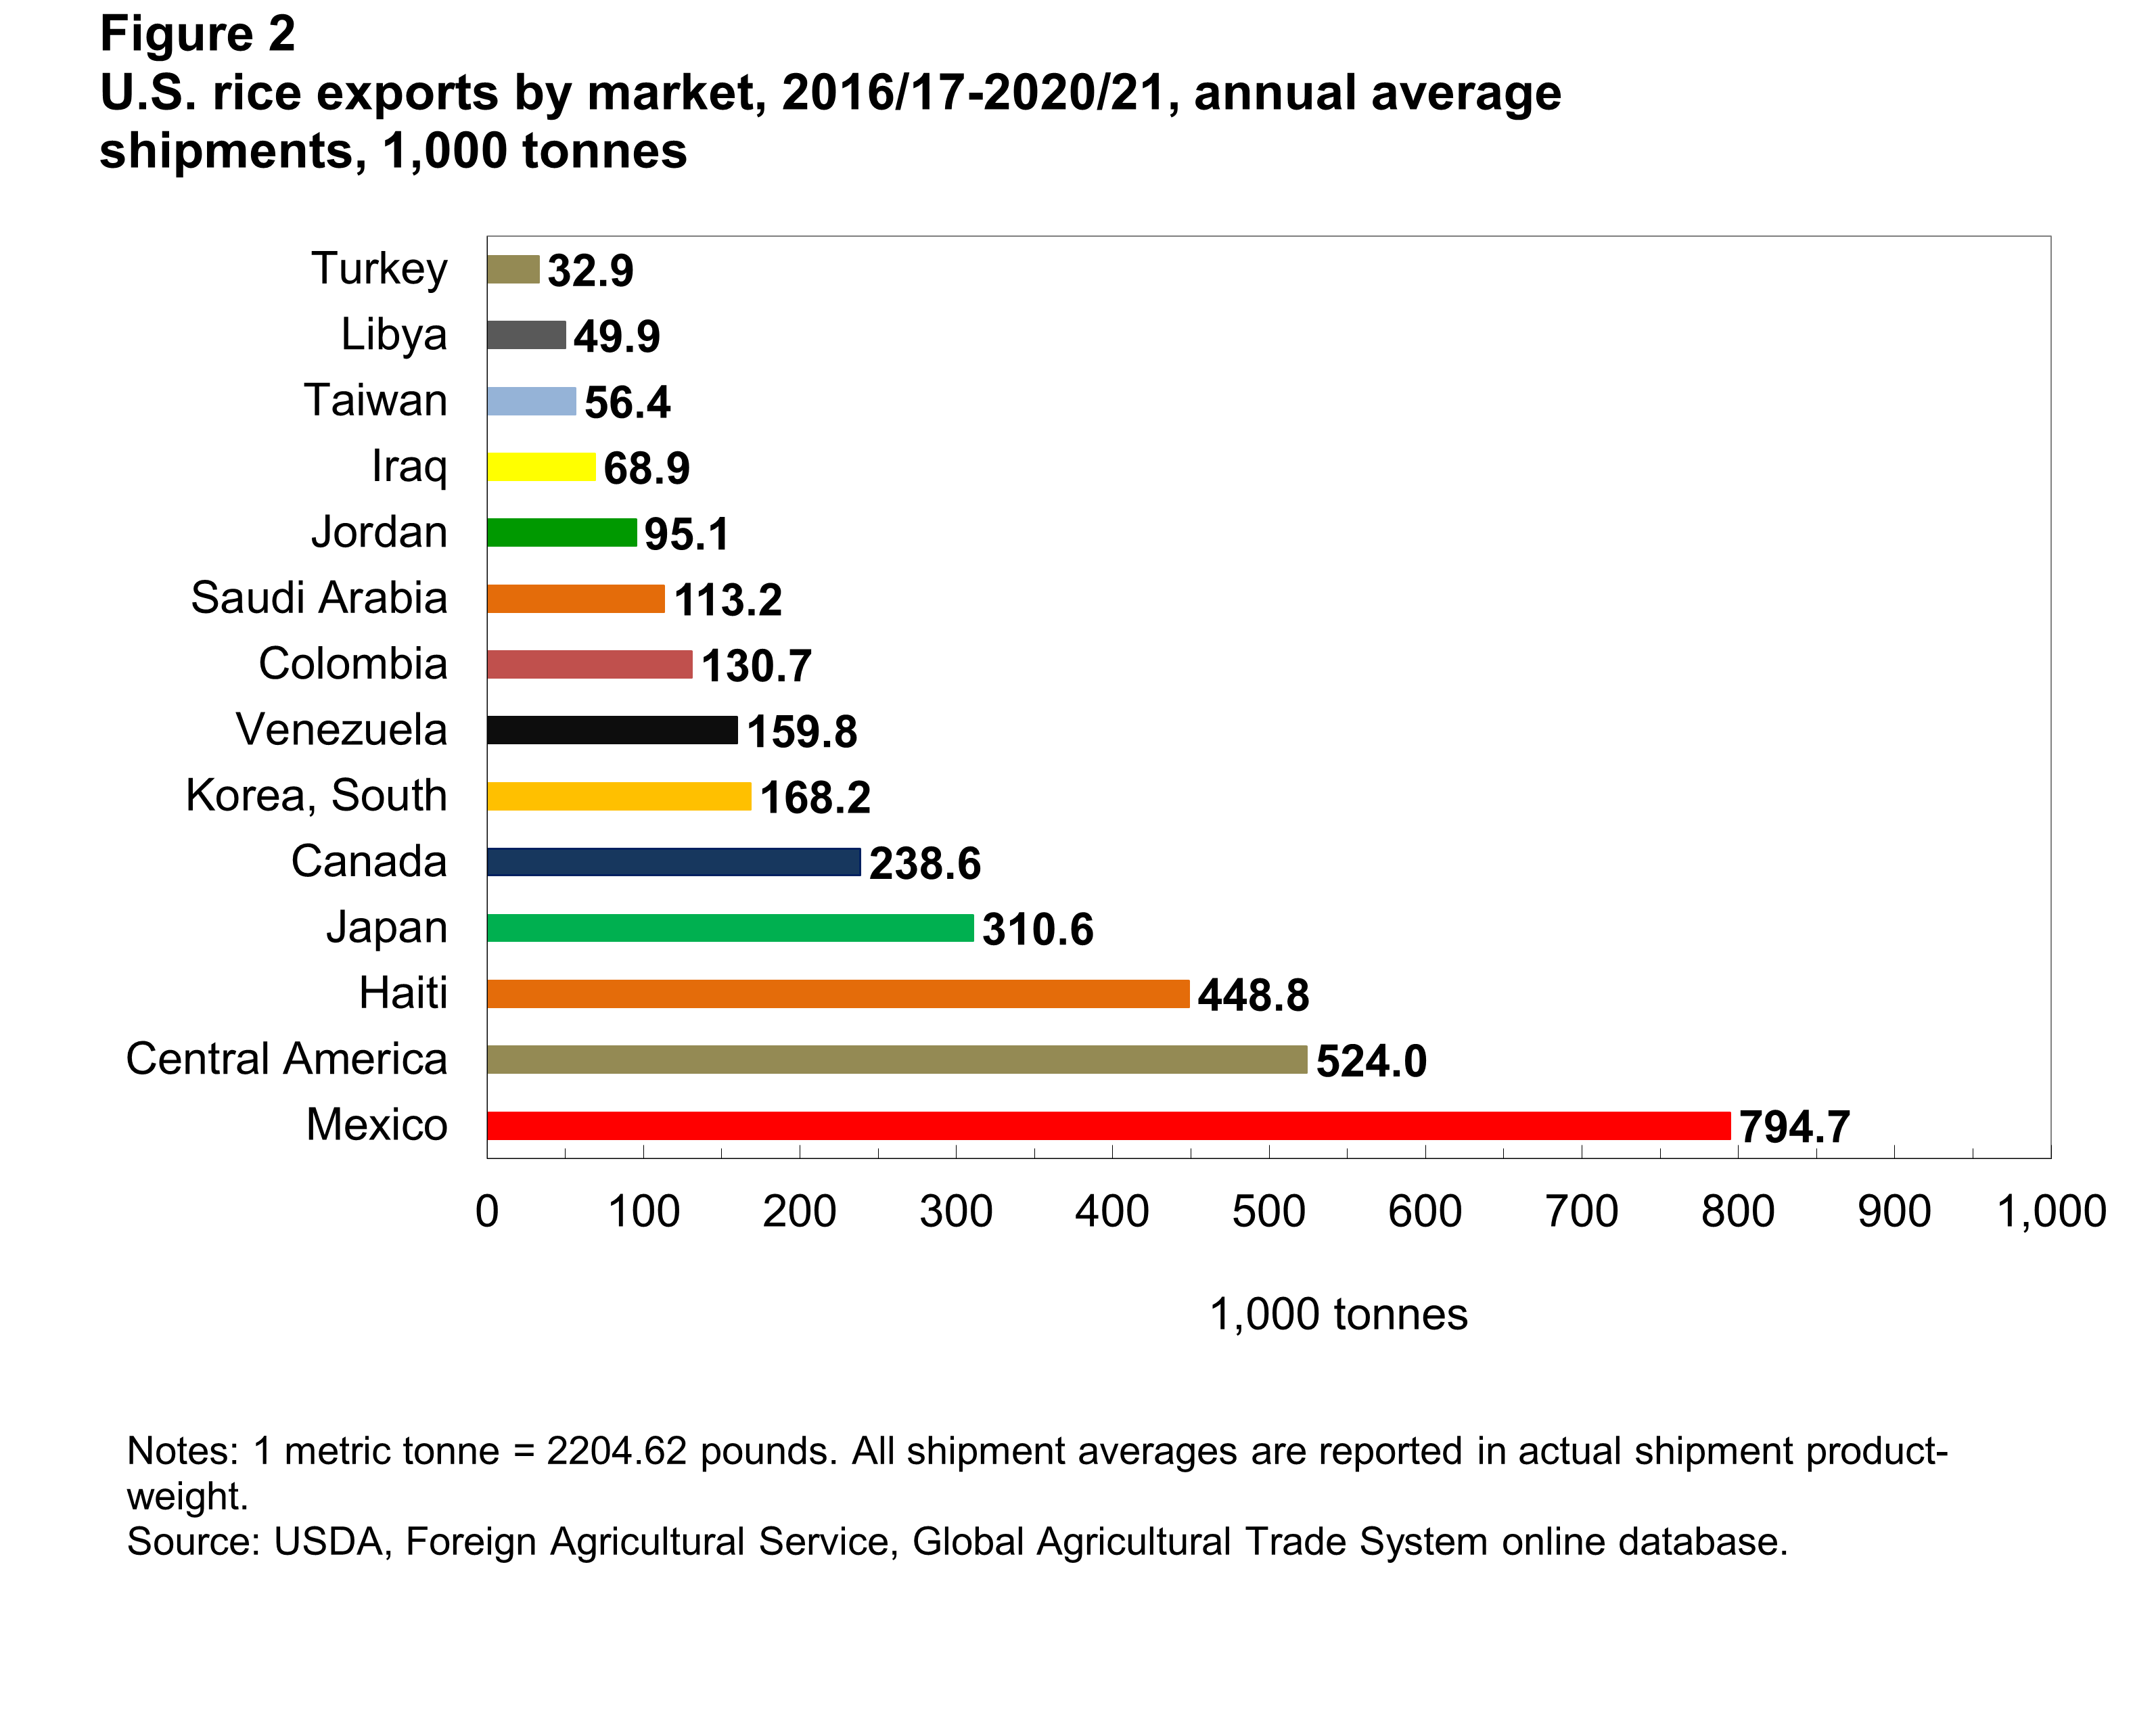 U.S. rice exports by market, 2016/17-2020/21, annual average shipments, 1,000 tonnes